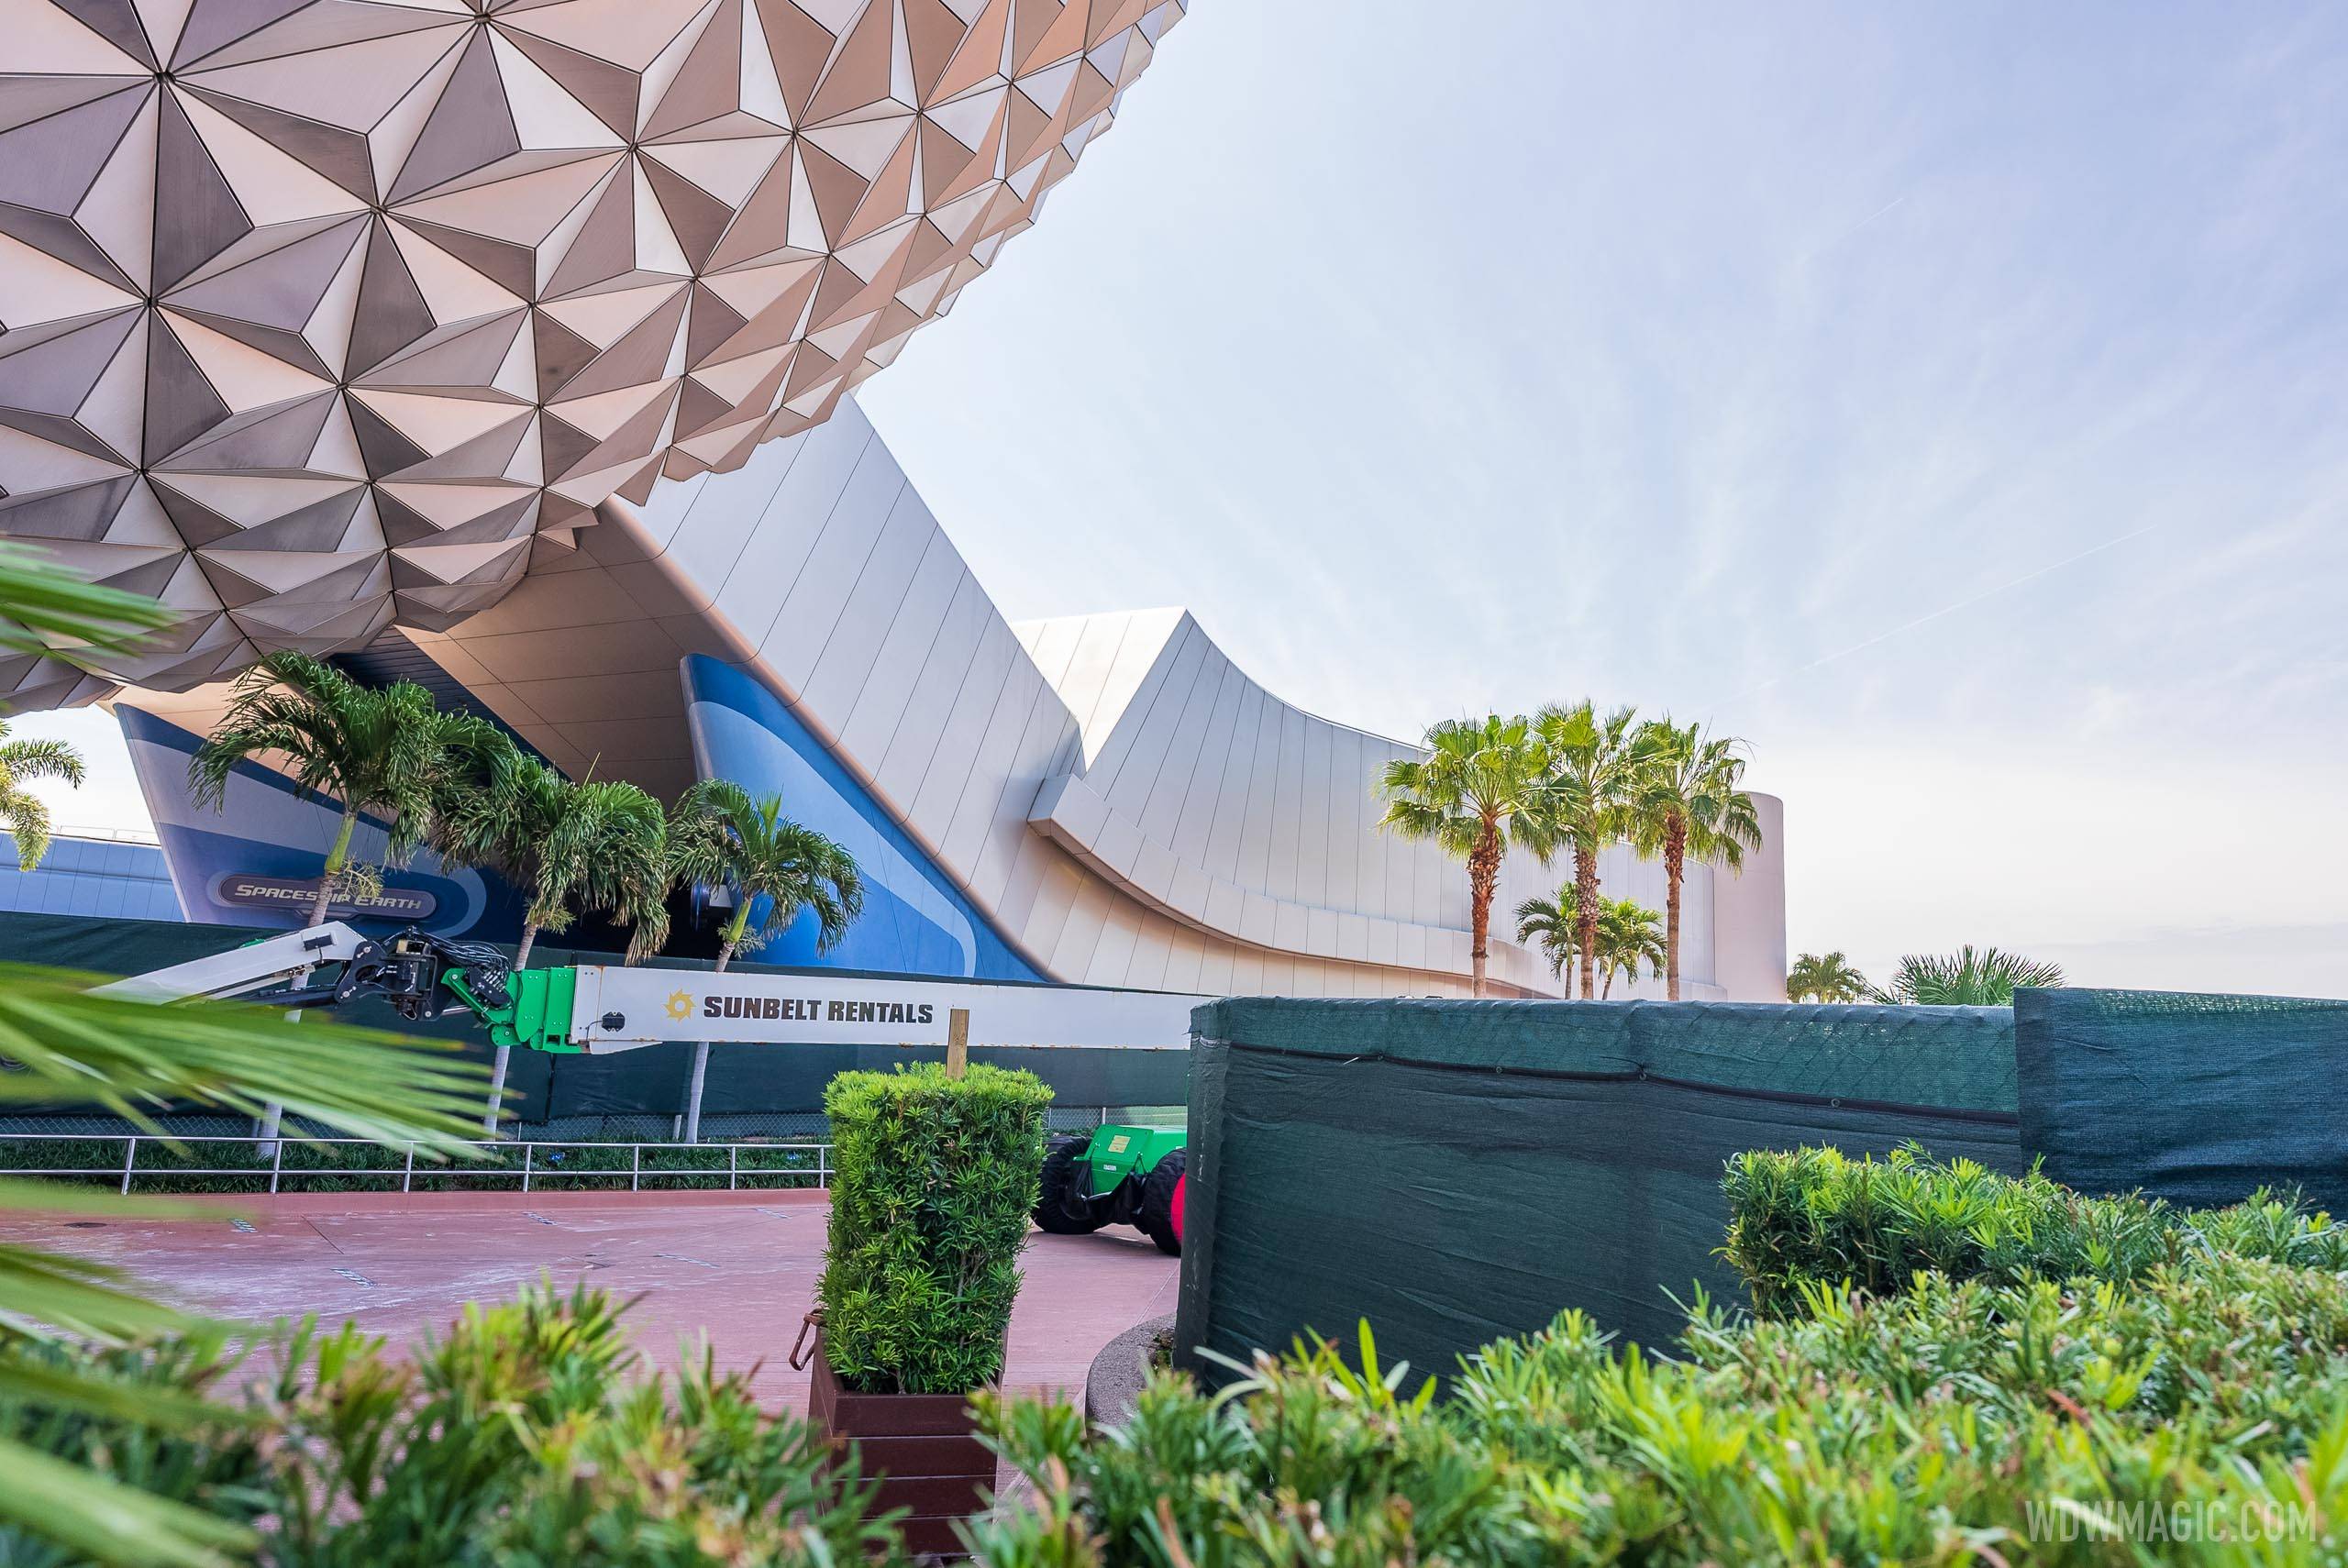 Spaceship Earth point of lights installation - April 21 2021